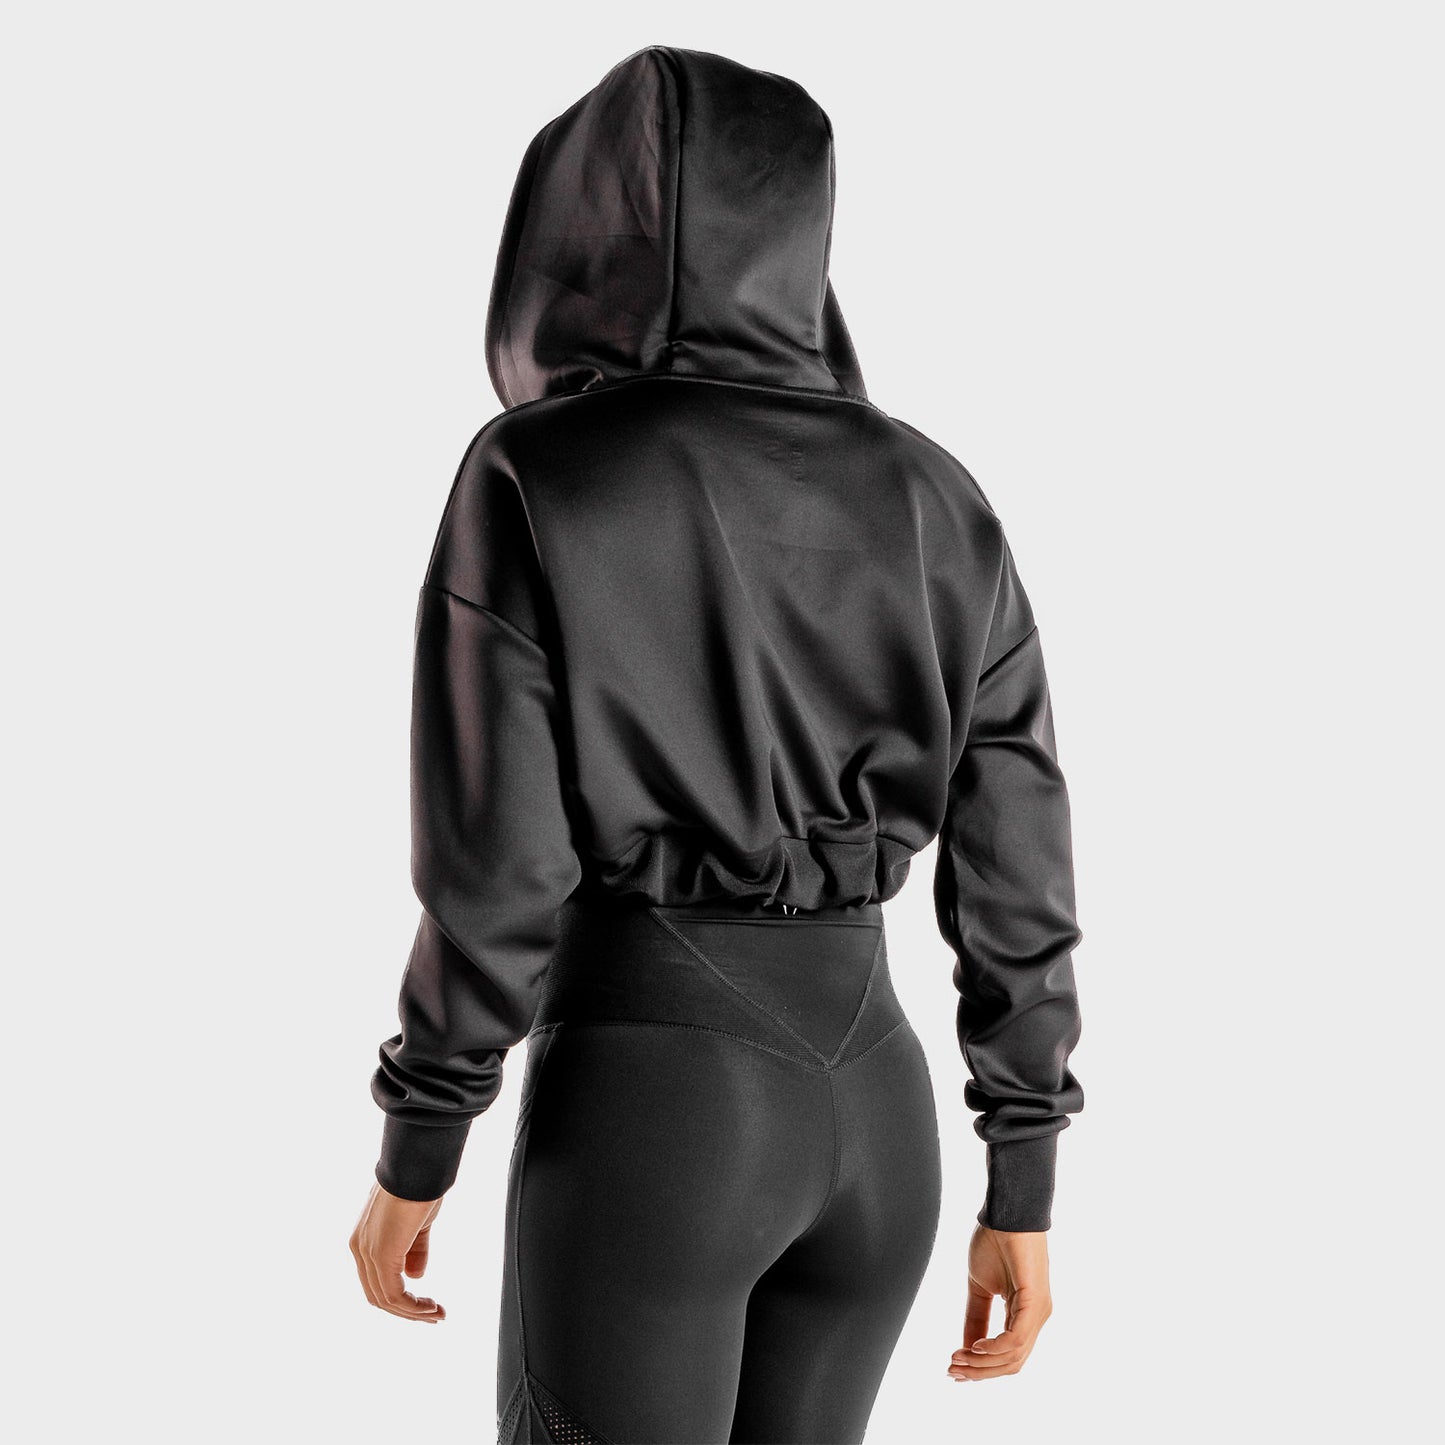 squatwolf-gym-hoodies-women-do-knot-hoodie-black-workout-clothes